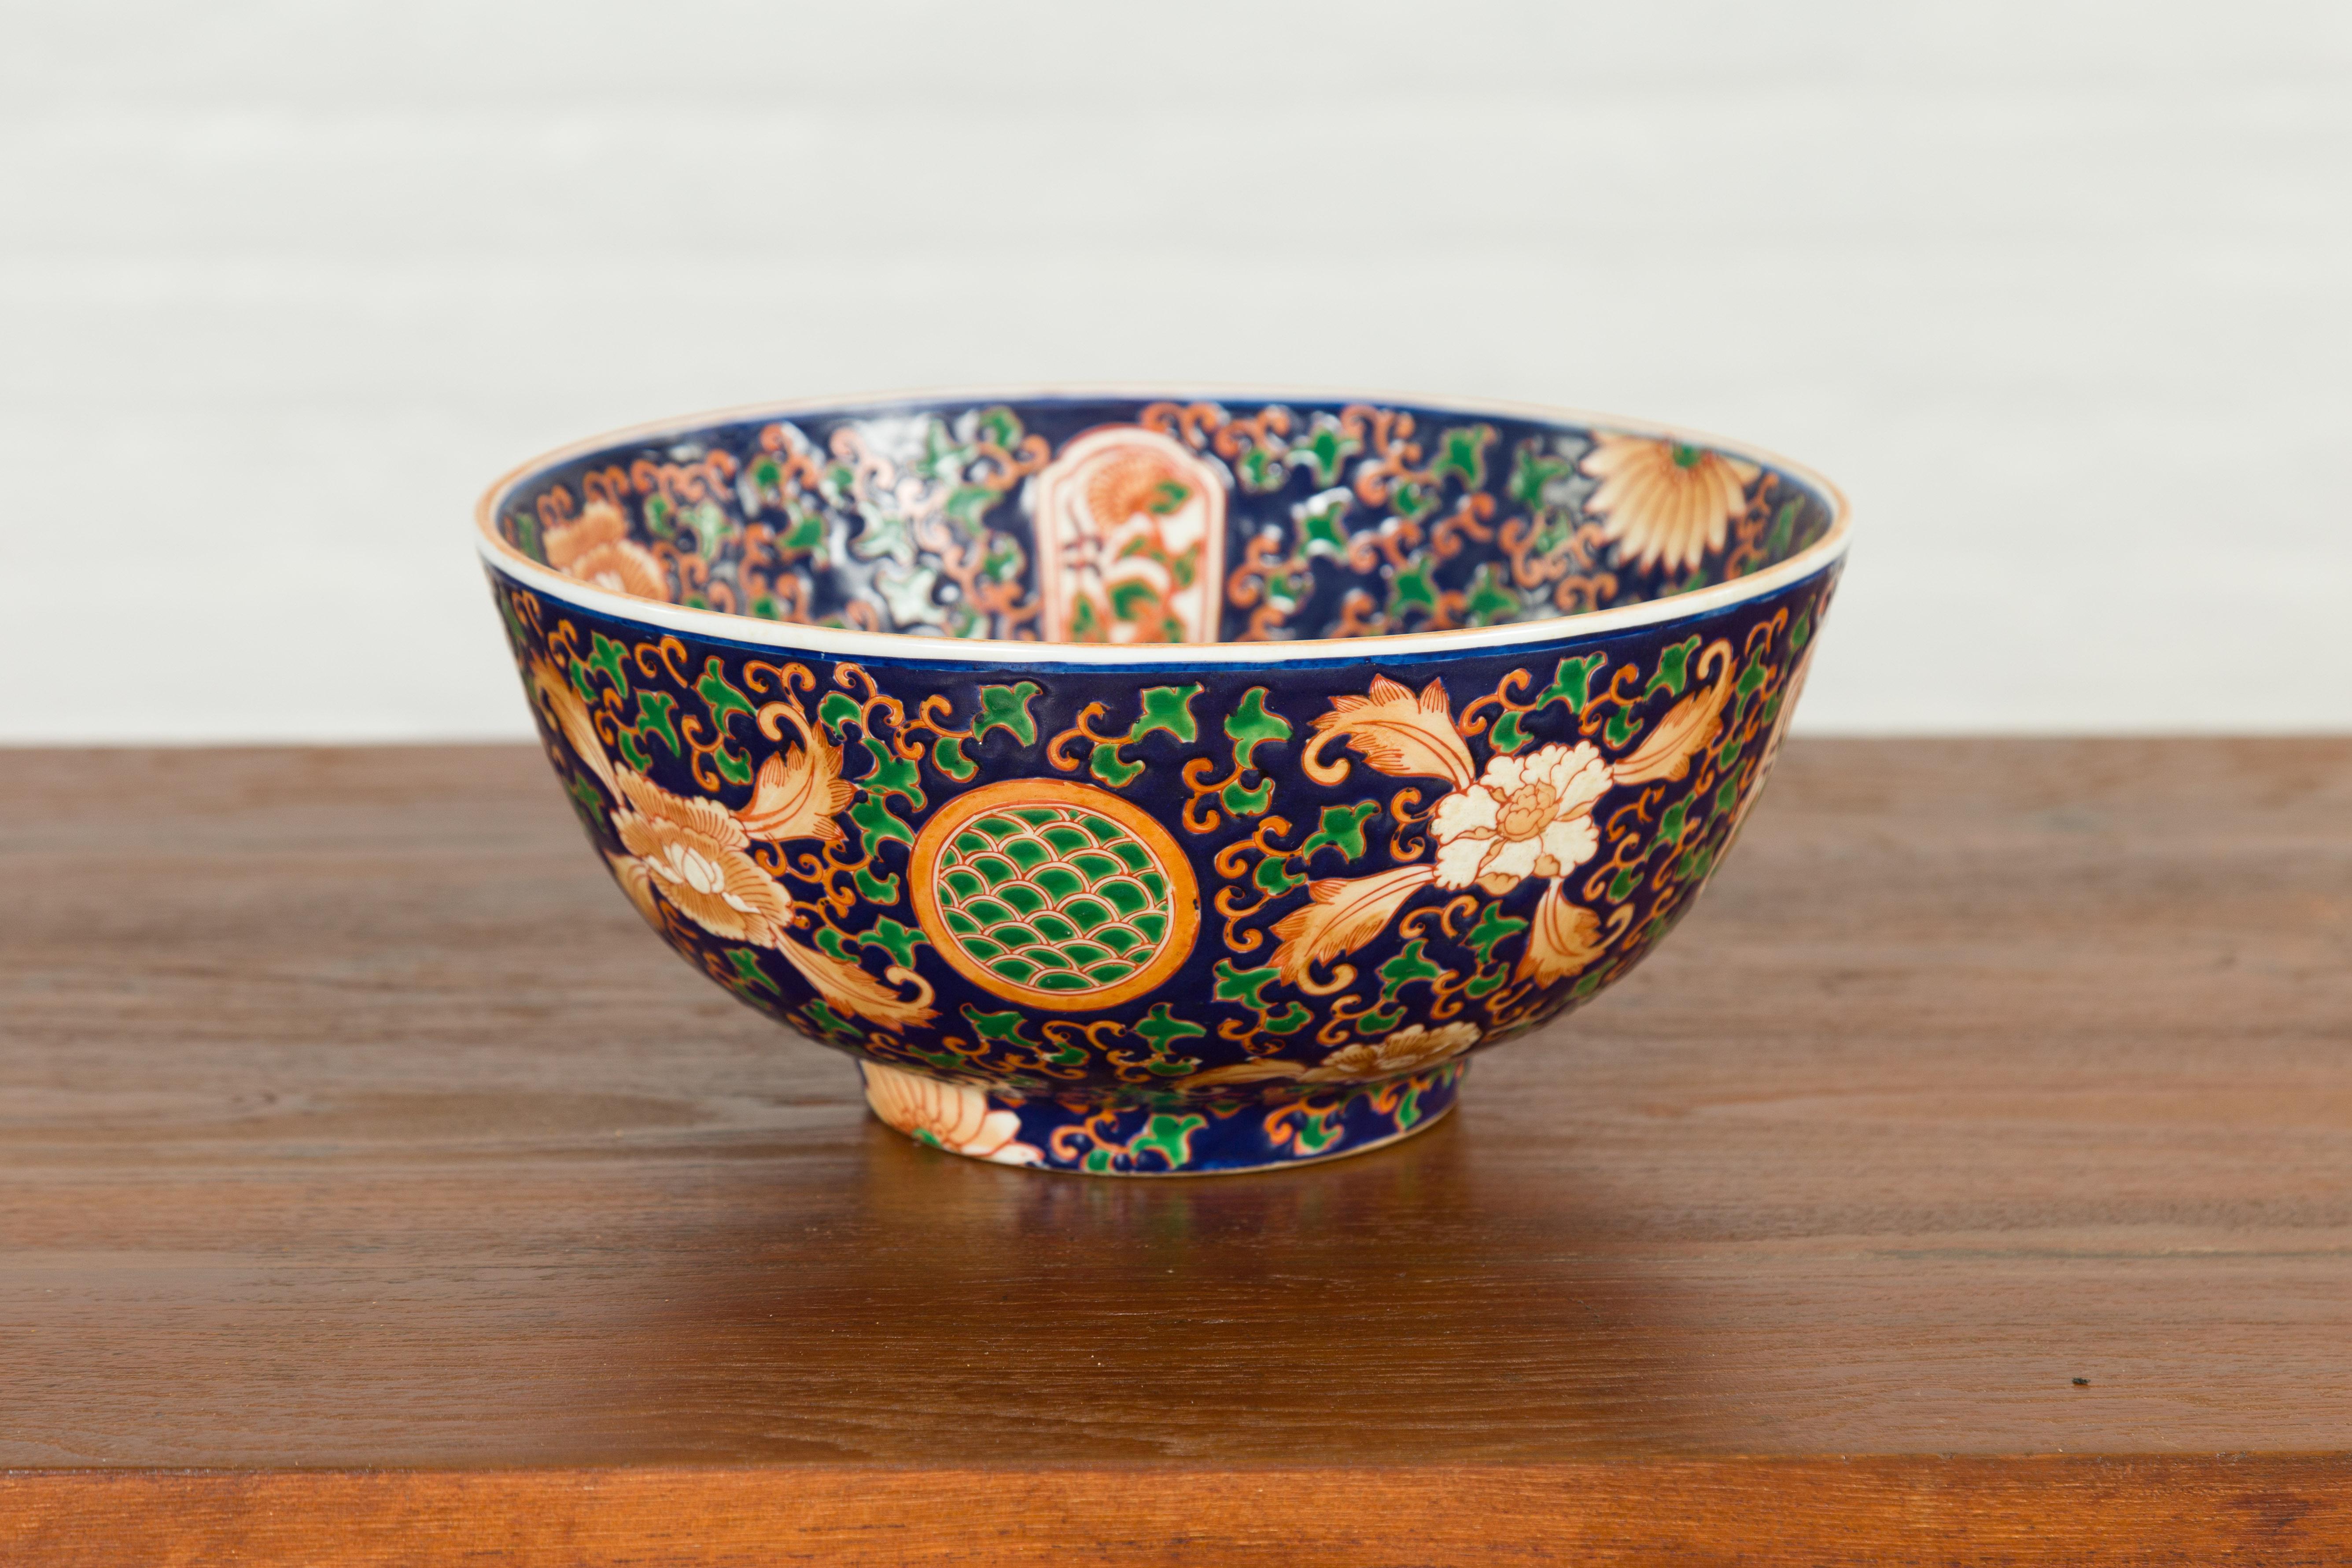 A Chinese contemporary hand painted bowl with cobalt blue ground, green and orange floral decor. Attracting our eyes with its rich motifs, this Chinese hand painted decorative bowl features a cobalt blue ground accented with delicate orange petite